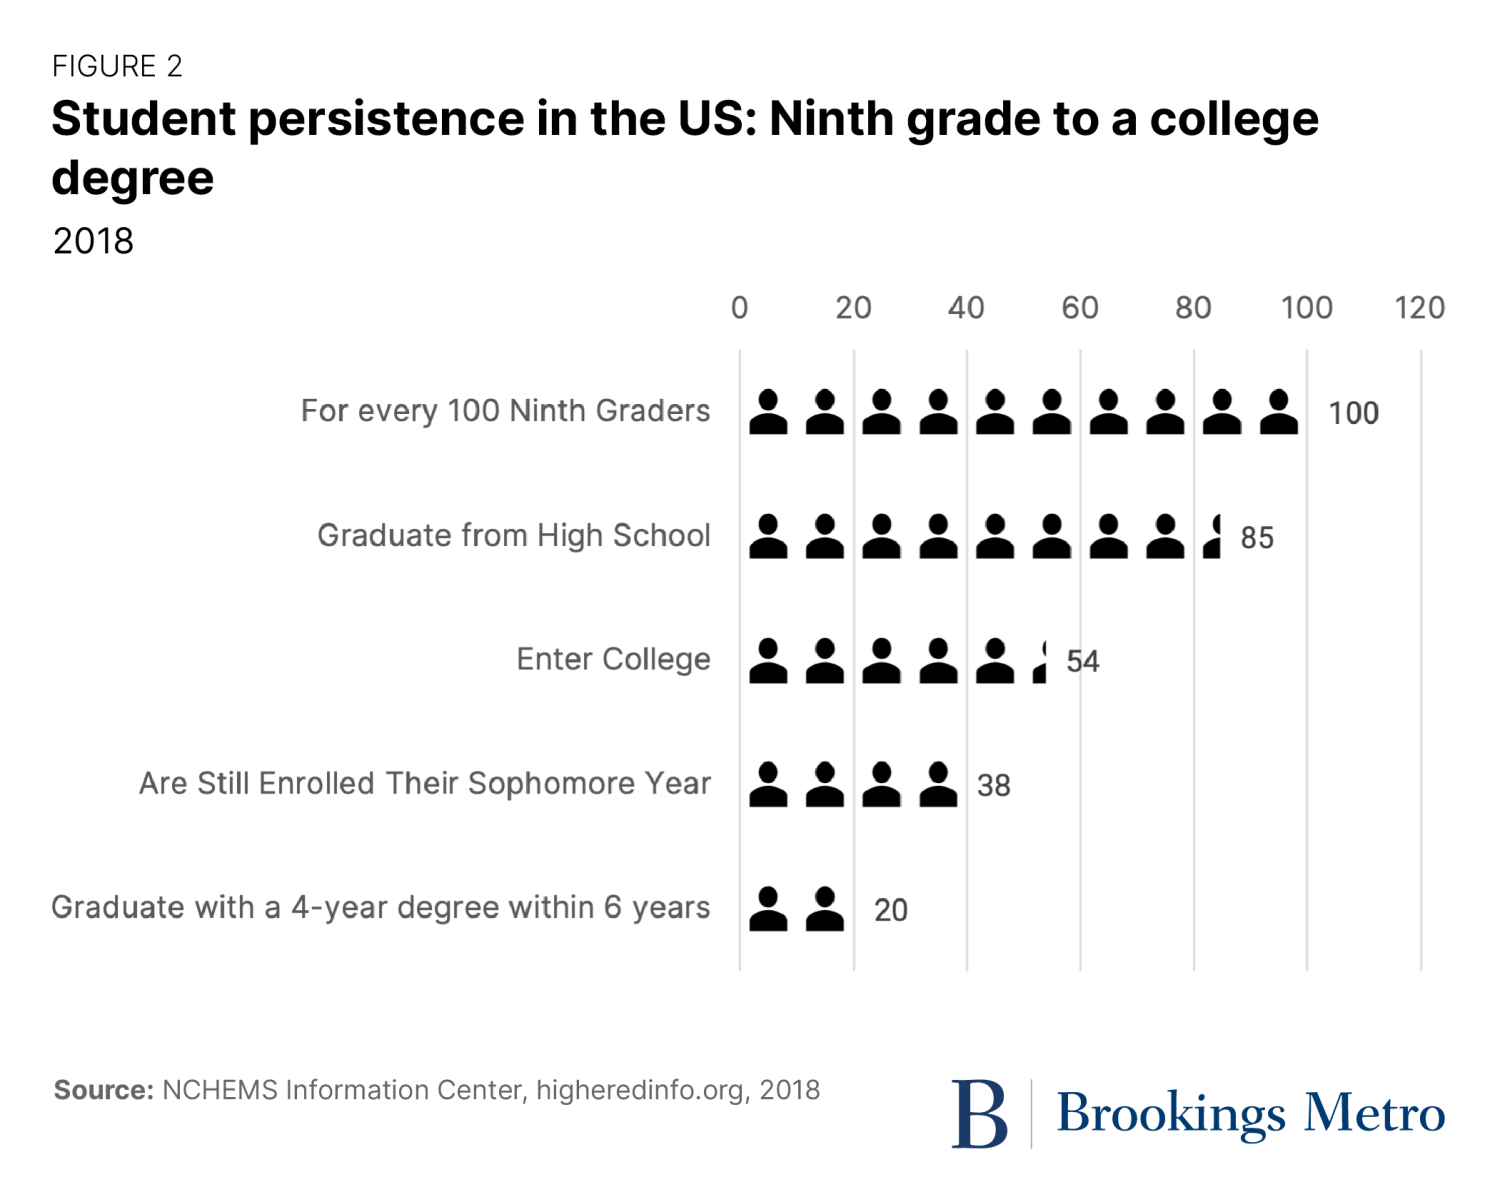 Figure 2. Student persistence in the US: Ninth grade to a college degree